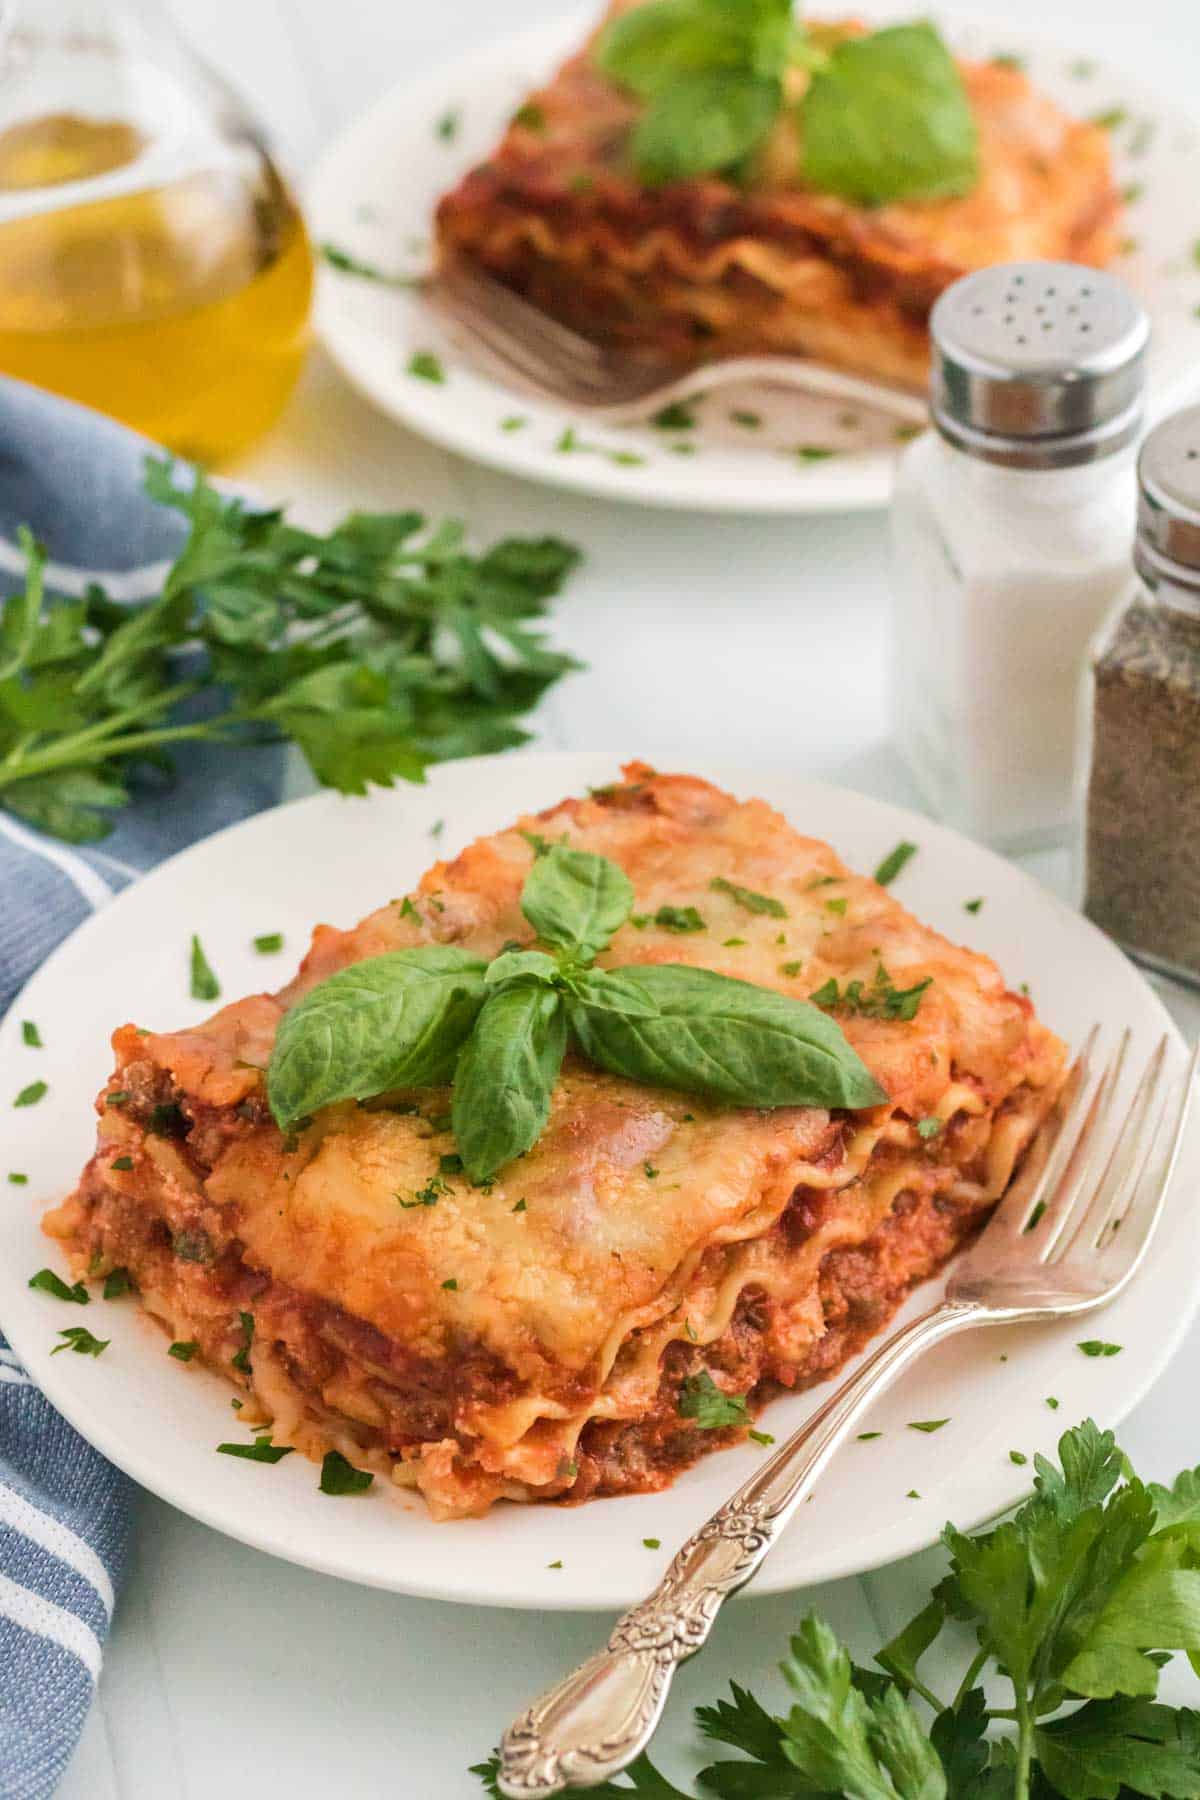 Slices of homemade lasagna on white plates